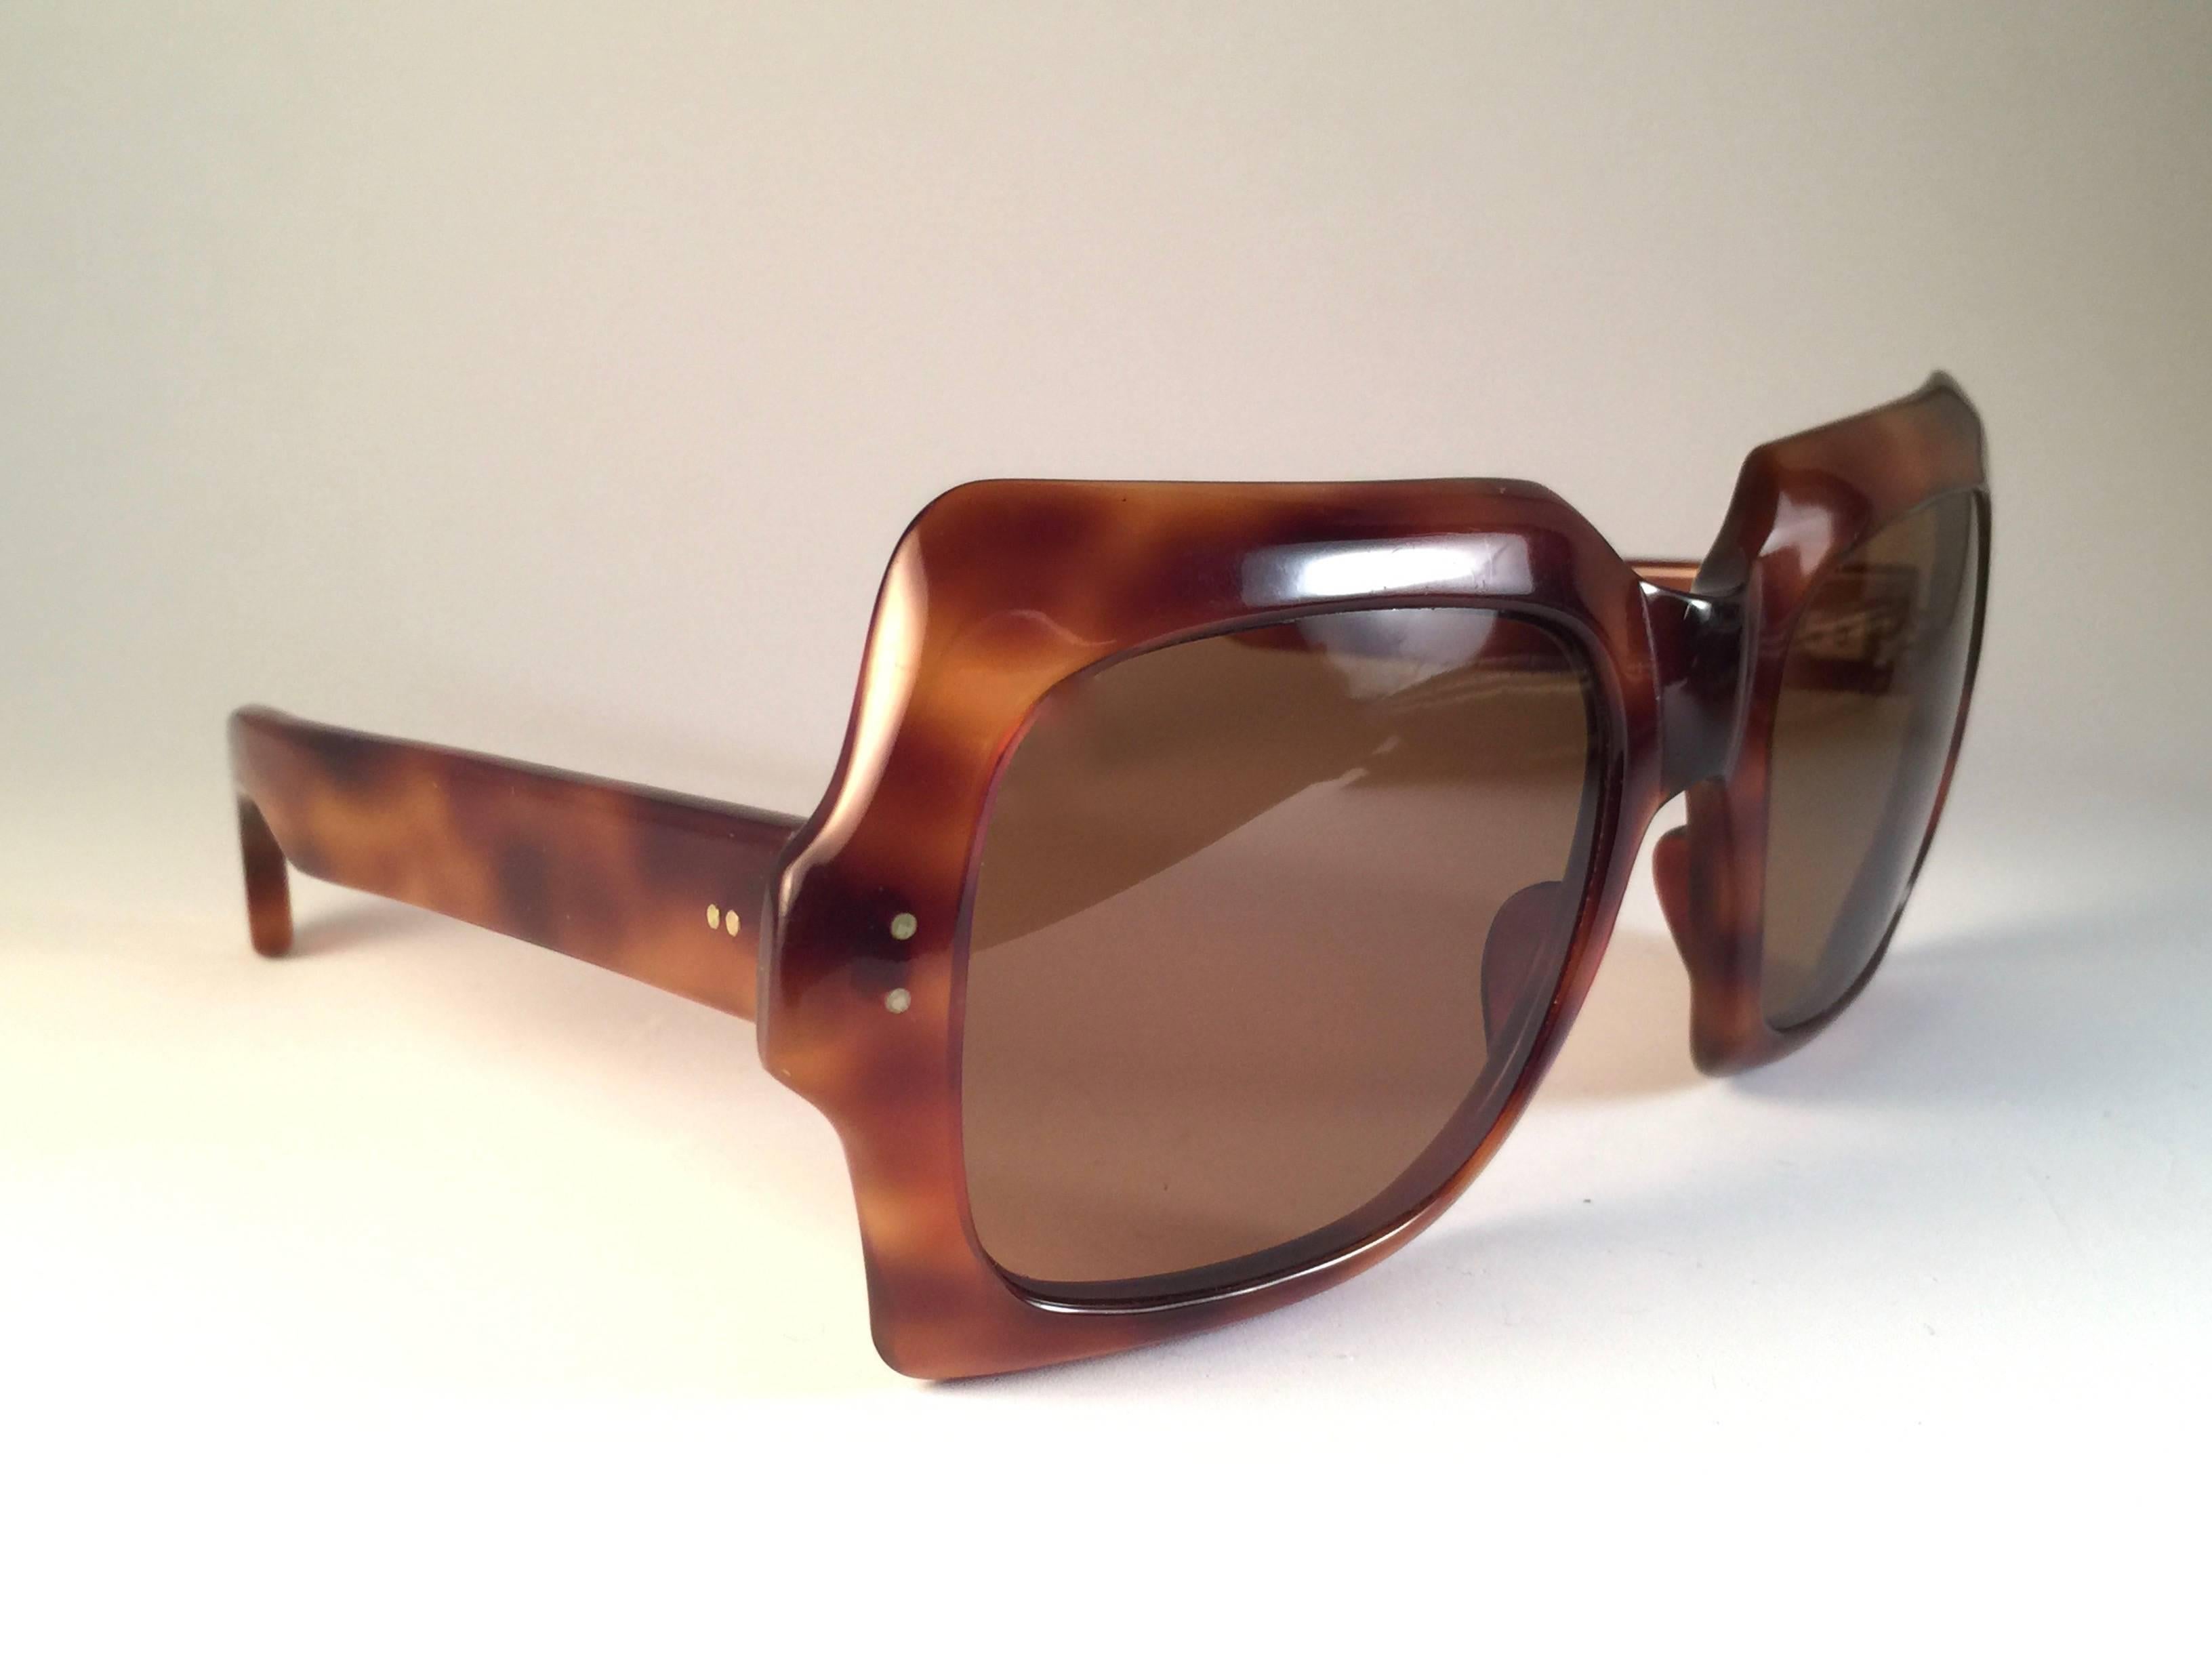 New rare collector's item vintage Philippe Chevalier dark tortoise oversized sunglasses with solid brown lenses.   
A superb find in new, never worn condition. 

Please notice this item may show moonier sign of wear due to storage.  

Made in France.